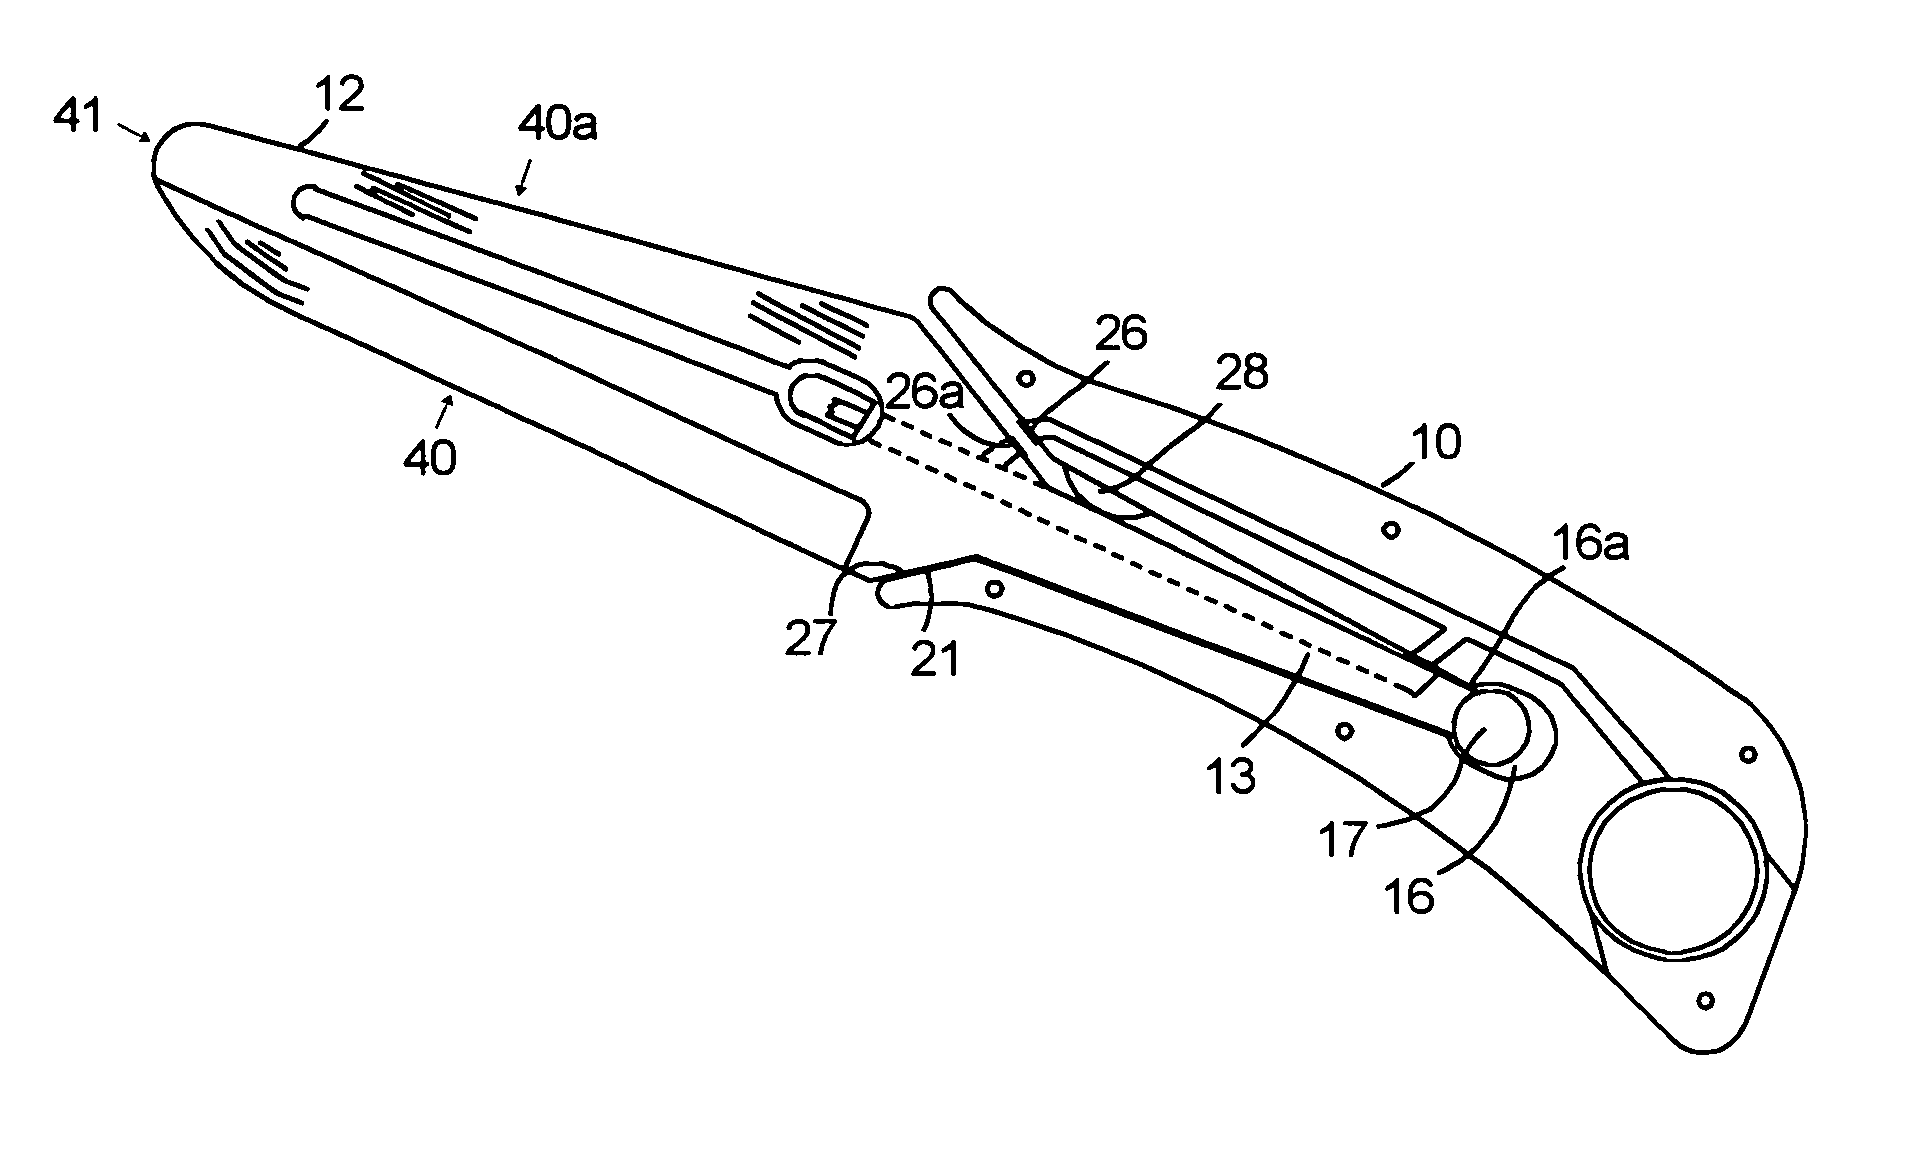 Simulated edged weapon or toy with element actuated indicating device